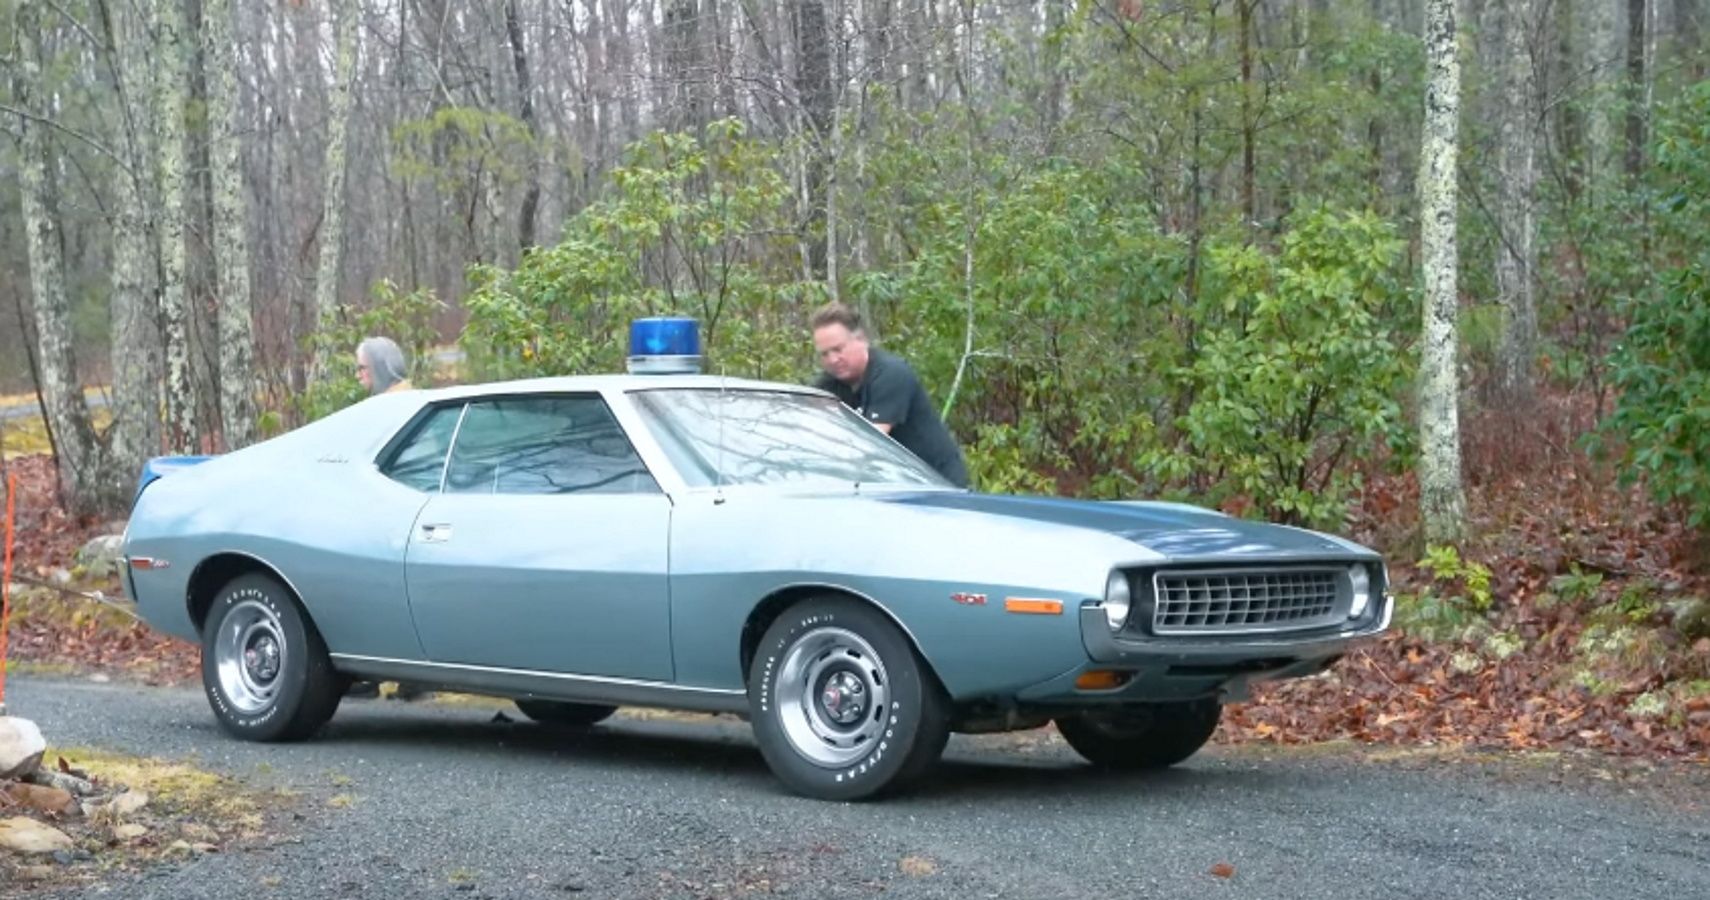 Dennis Collins steers a 1972 AMC Javelin during towing